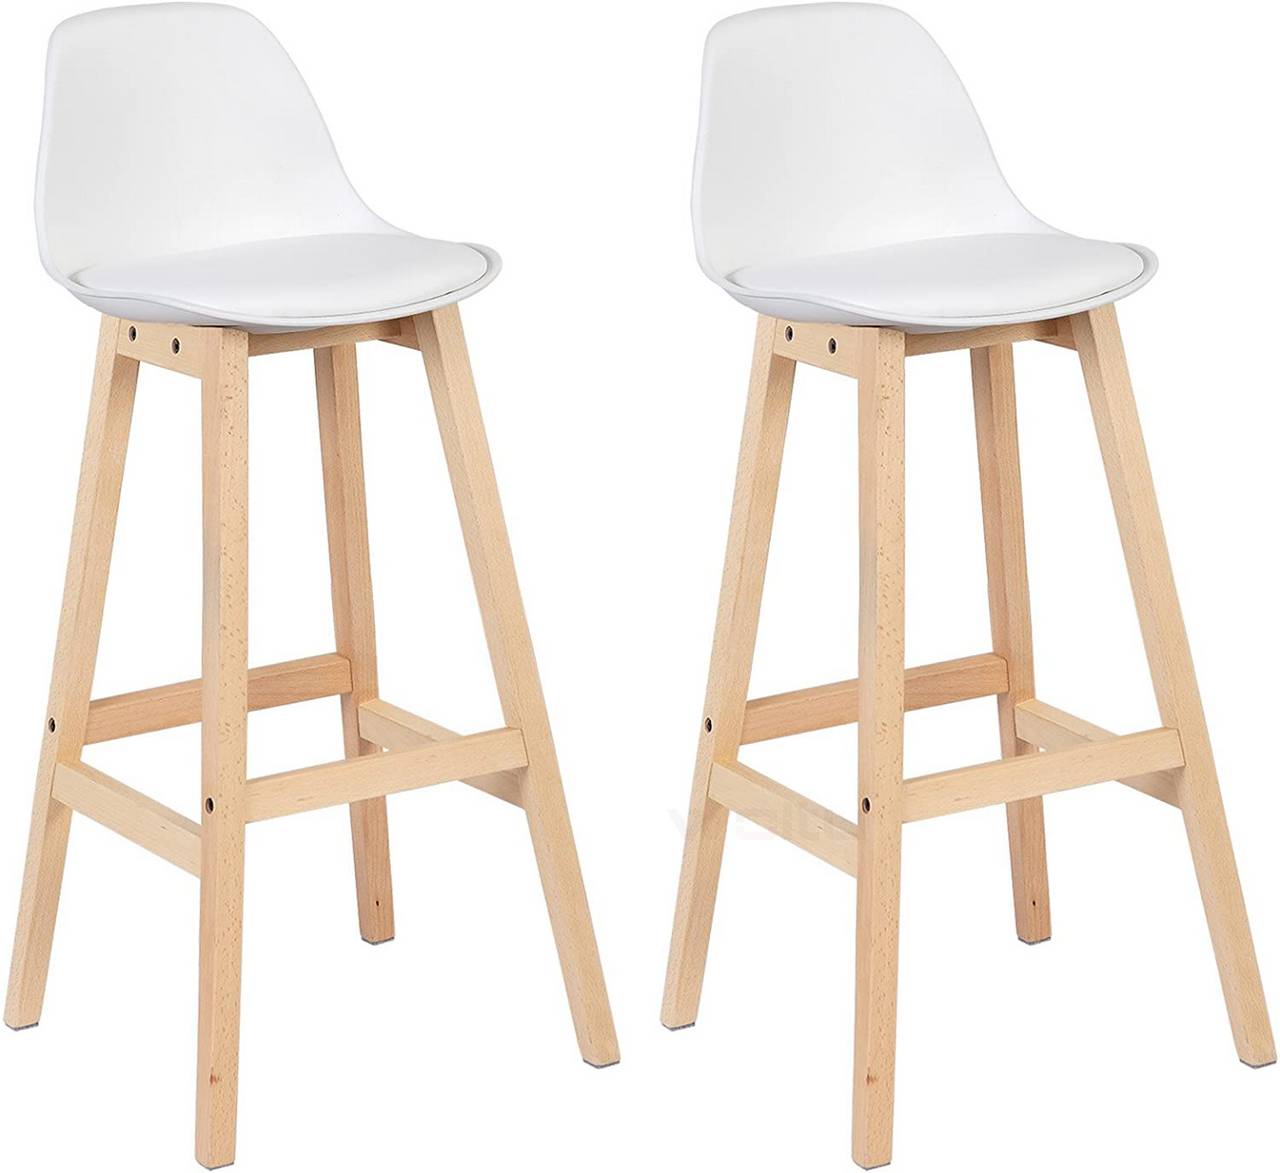 breakfast kitchen counter chairs bar stools set of 2  white